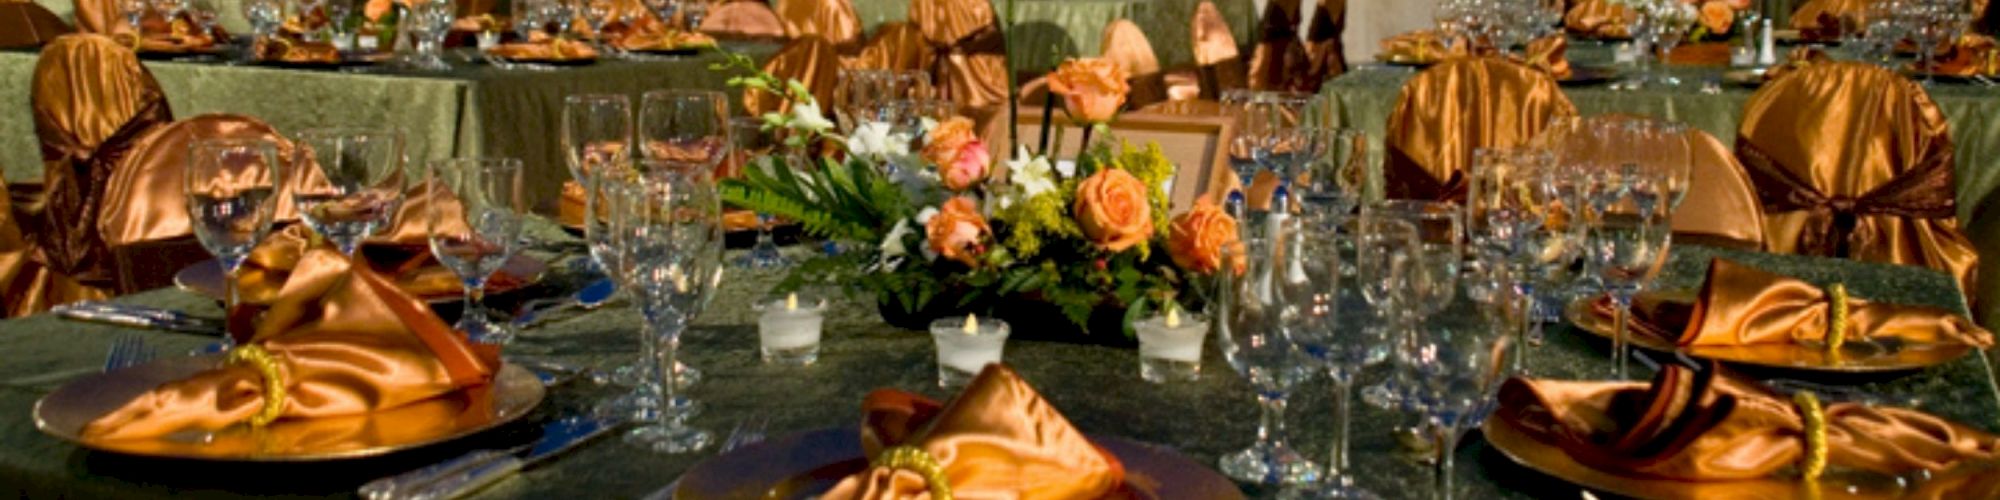 A banquet setup with elegantly decorated tables featuring orange napkins, floral centerpieces, multiple glasses, and dim lighting in the background.